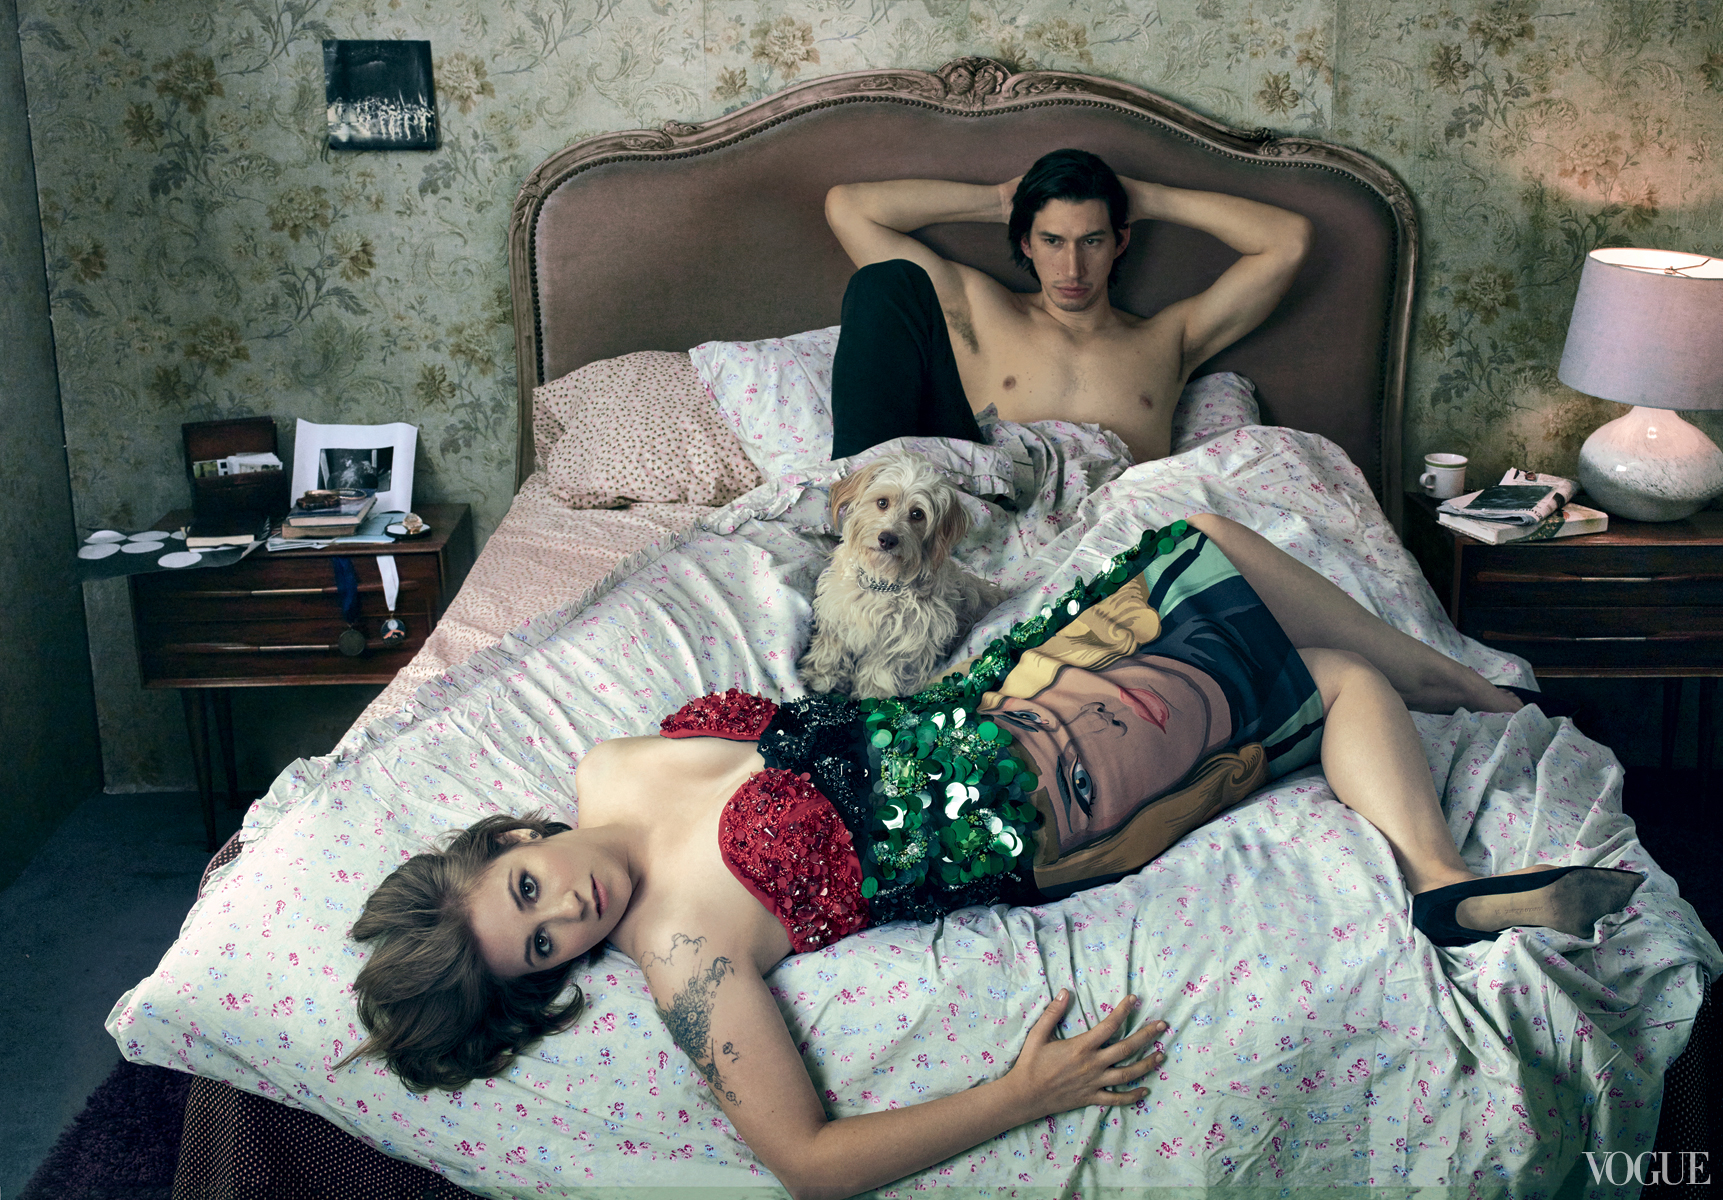 Adam Driver Joins Girls Co-Star Lena Dunham for her Vogue Cover Story.